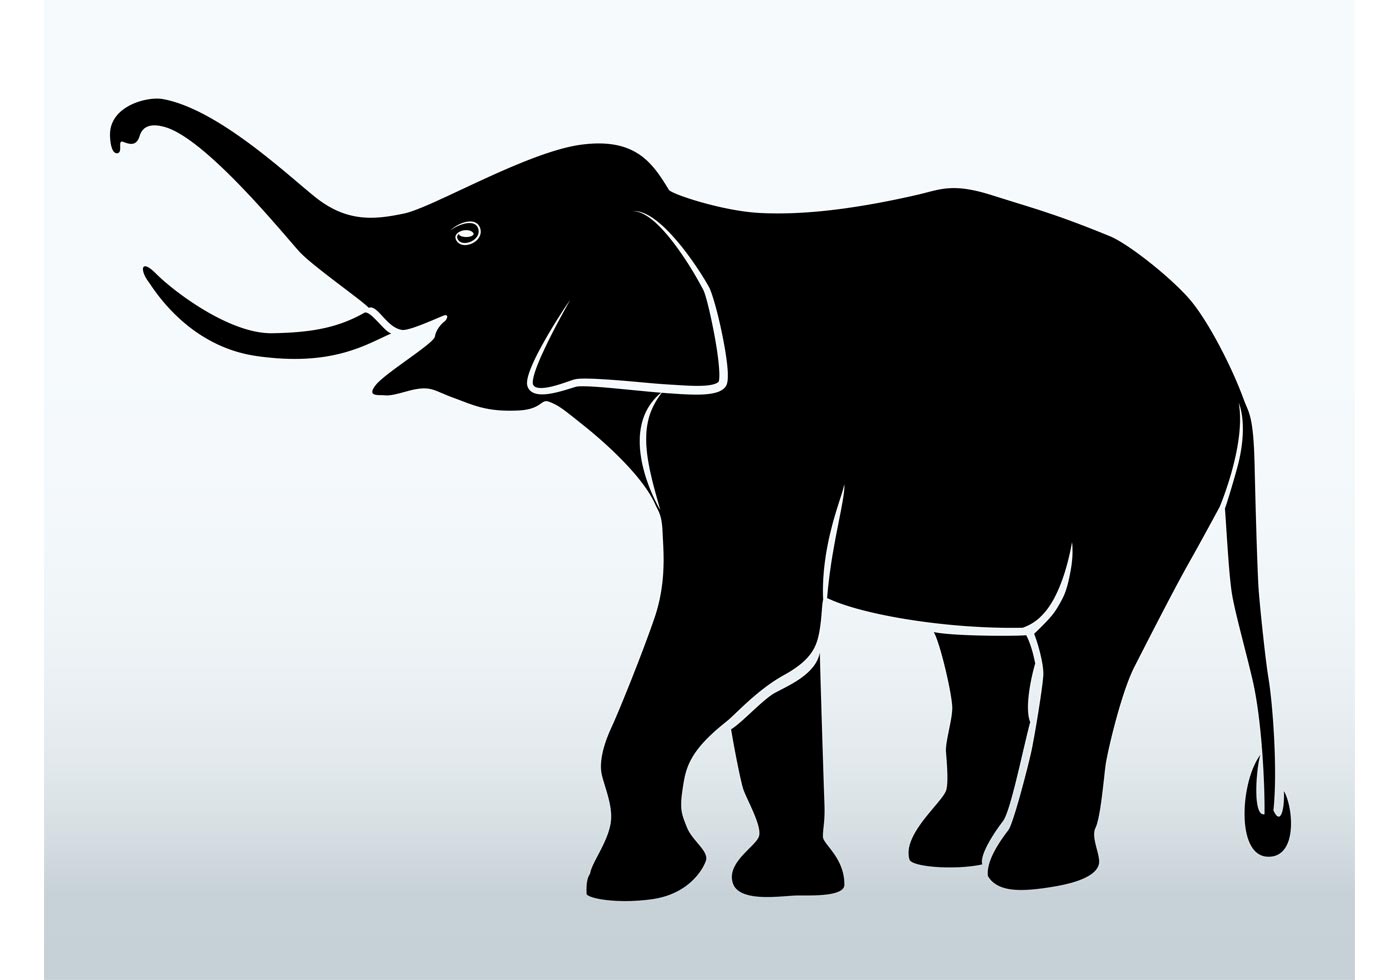 Elephant Graphic - Download Free Vector Art, Stock Graphics & Images